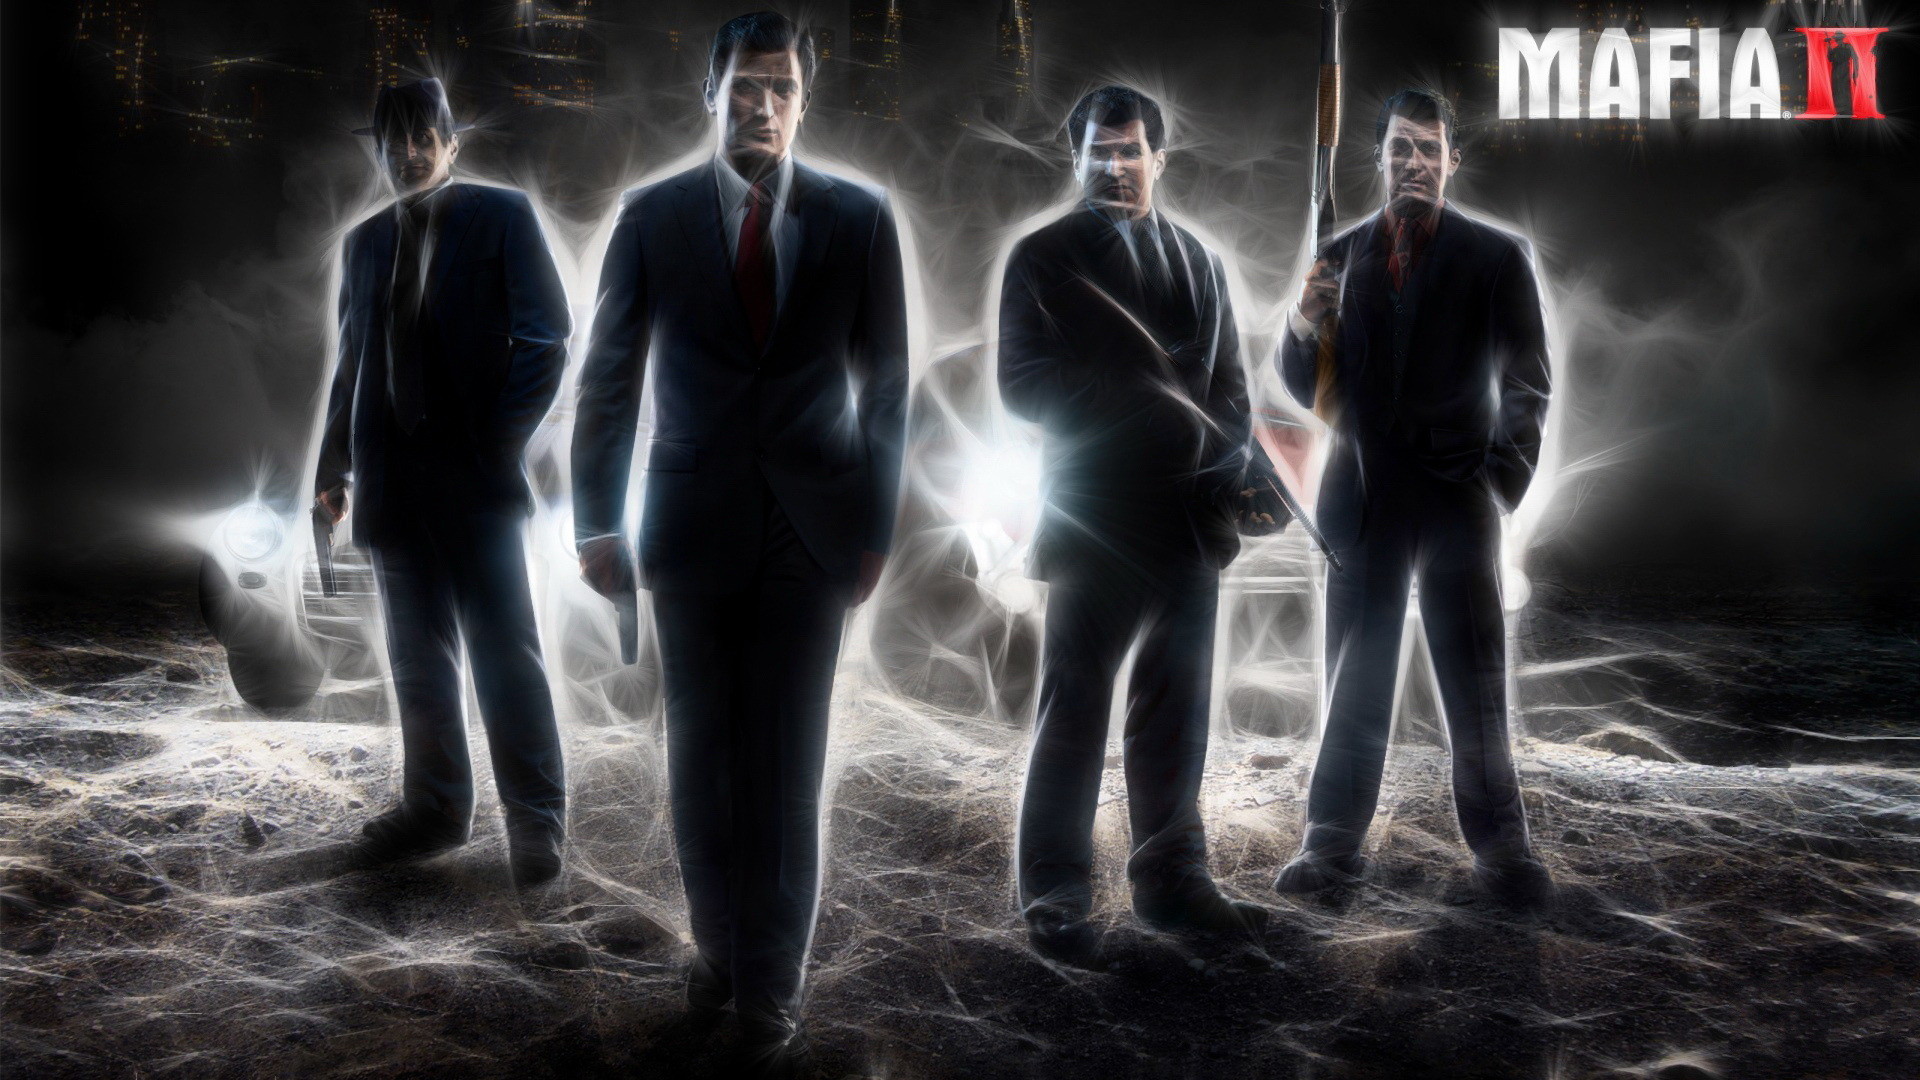 1920x1080 on August 4, 2015 By Stephen Comments Off on Mafia 2 Wallpapers .